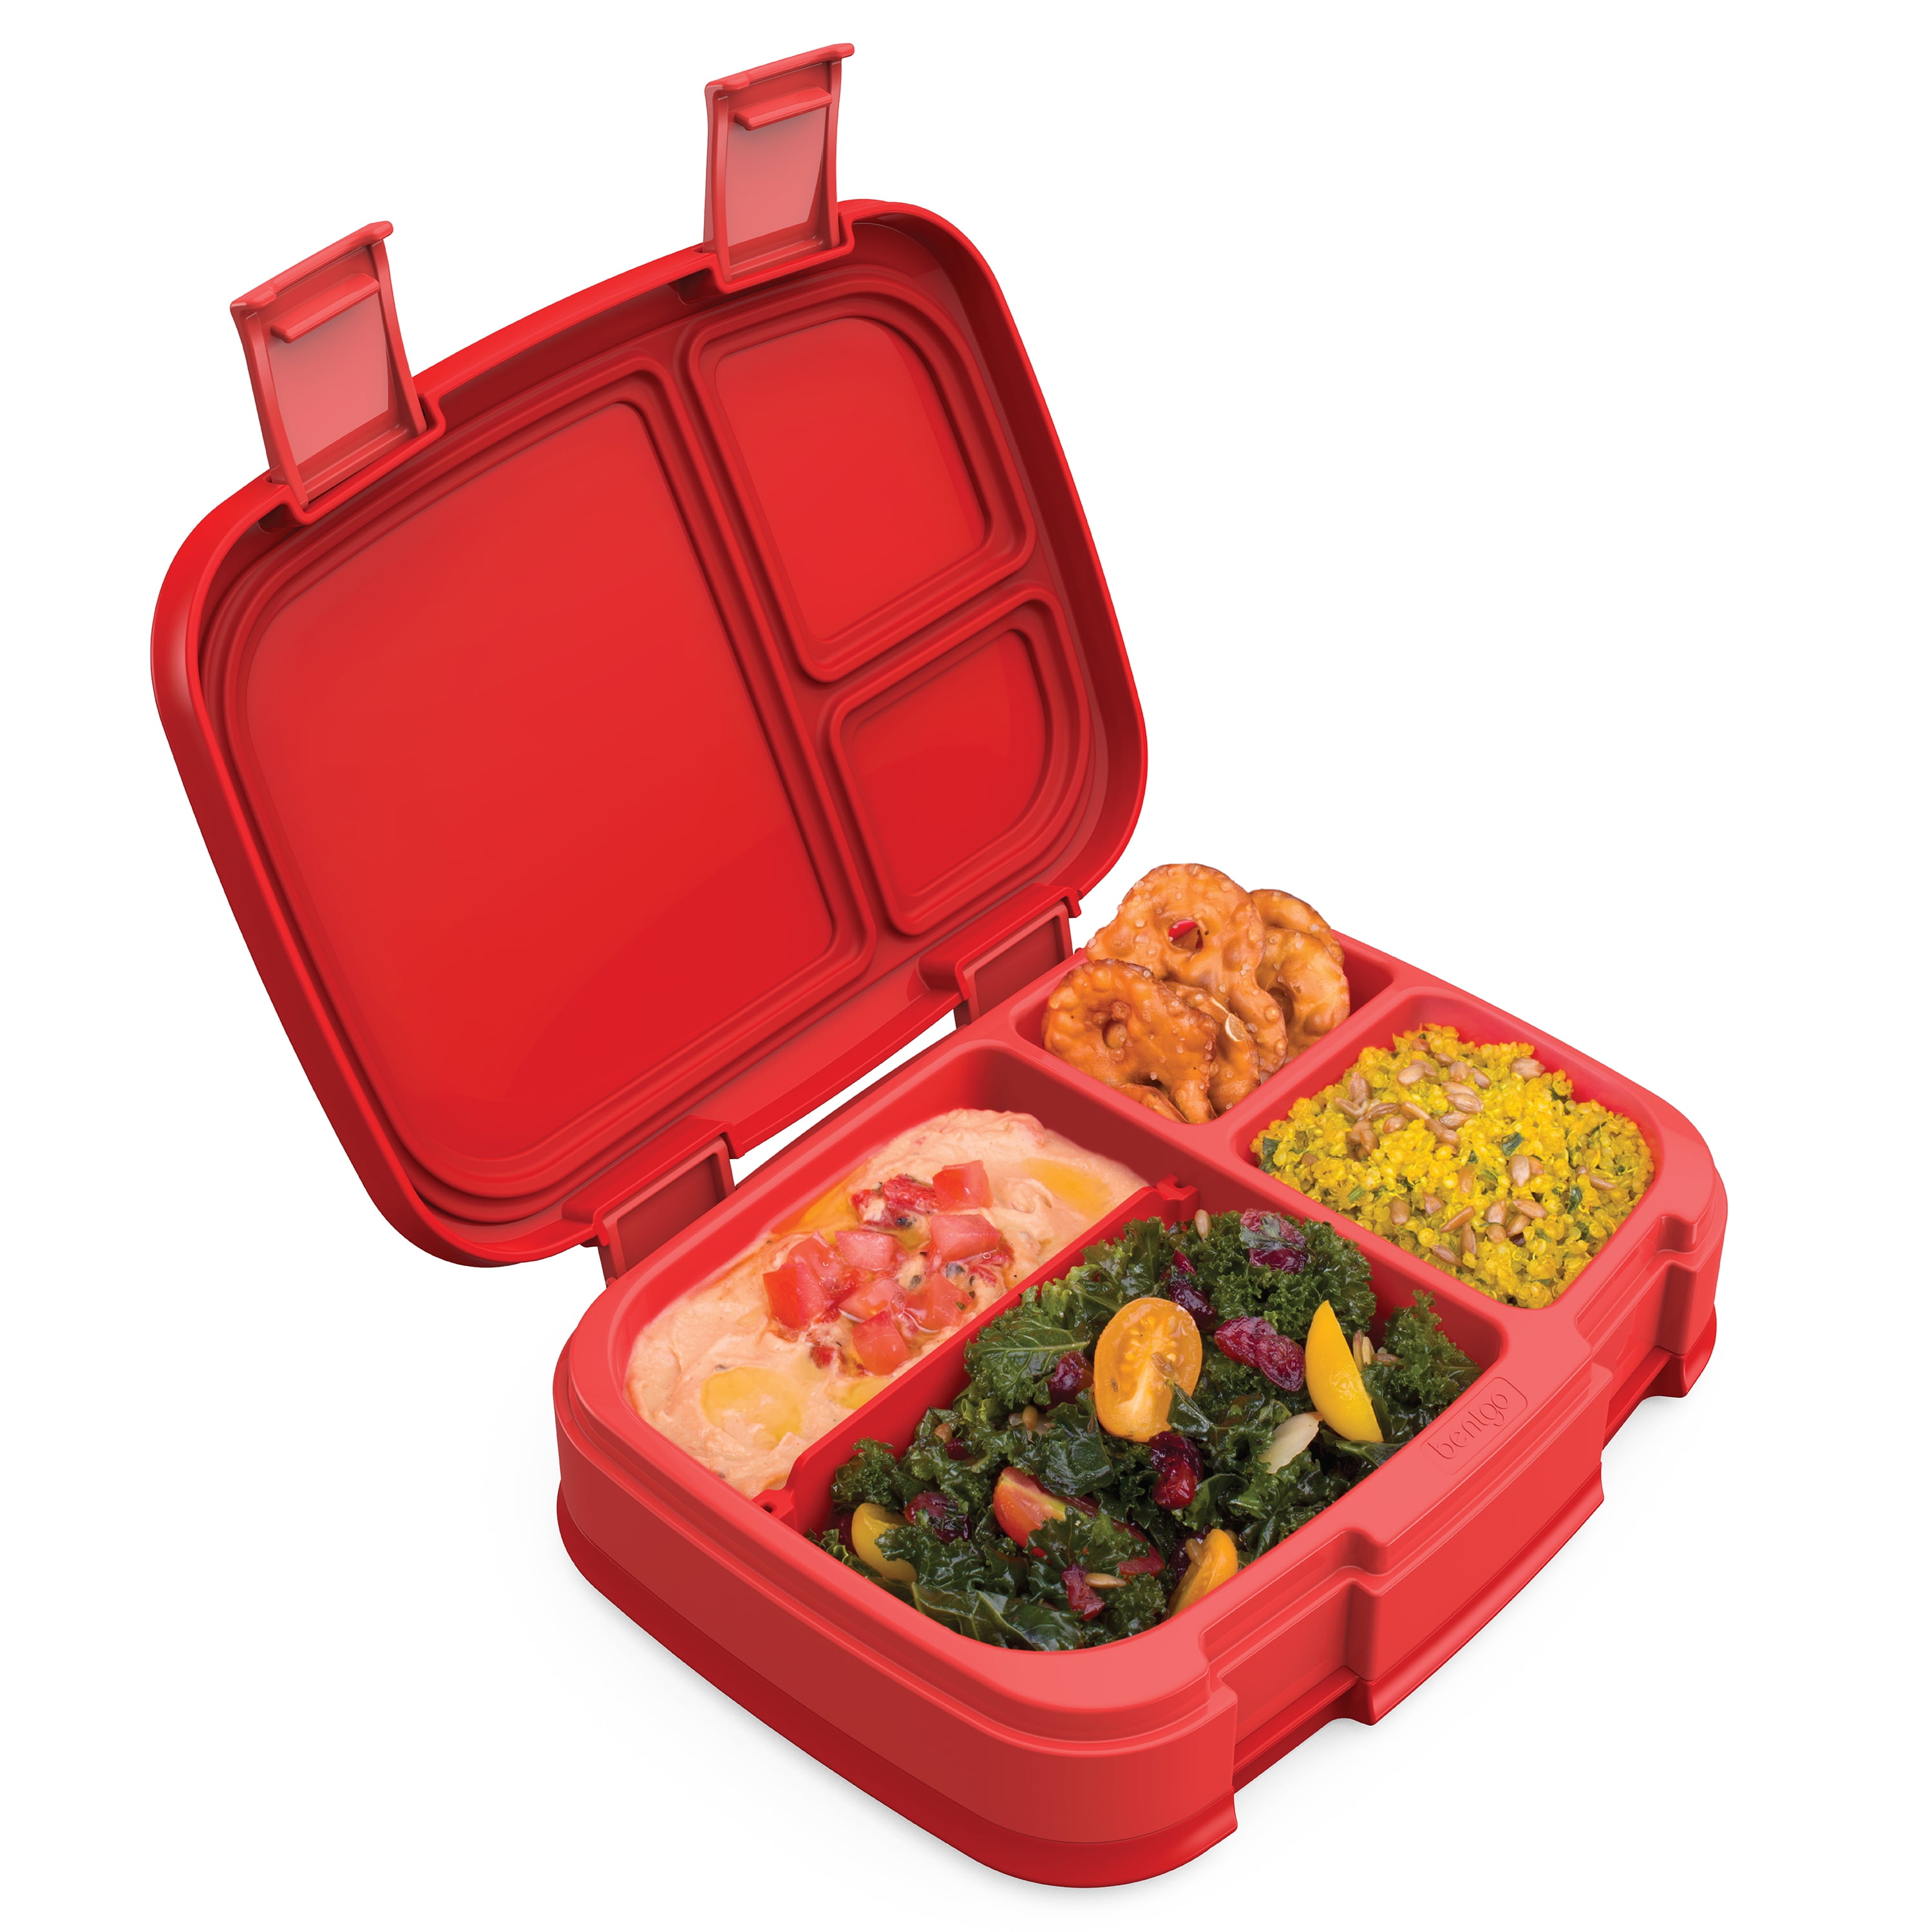 Bentgo®️ Modern Lunch Box - The Stylish and Leak-Proof Lunch Box for Adults  